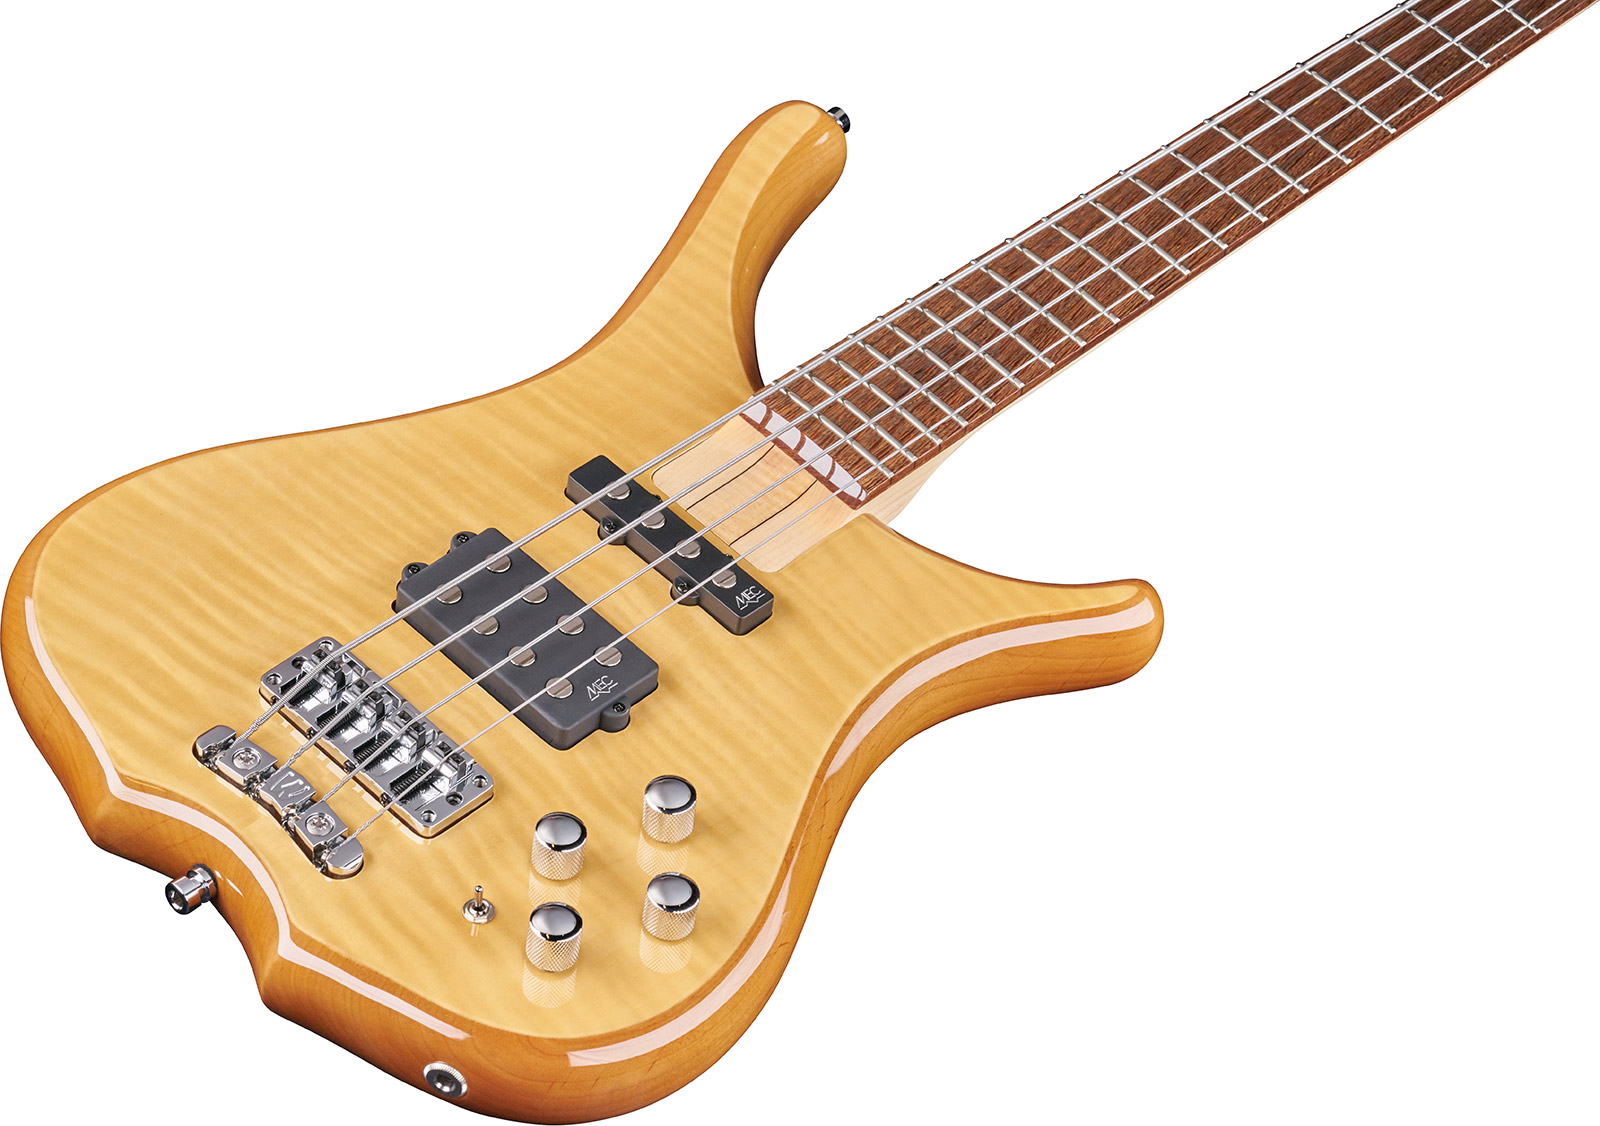 Warwick Infinity 4c Rockbass Active Wen - Natural - Solid body electric bass - Variation 2